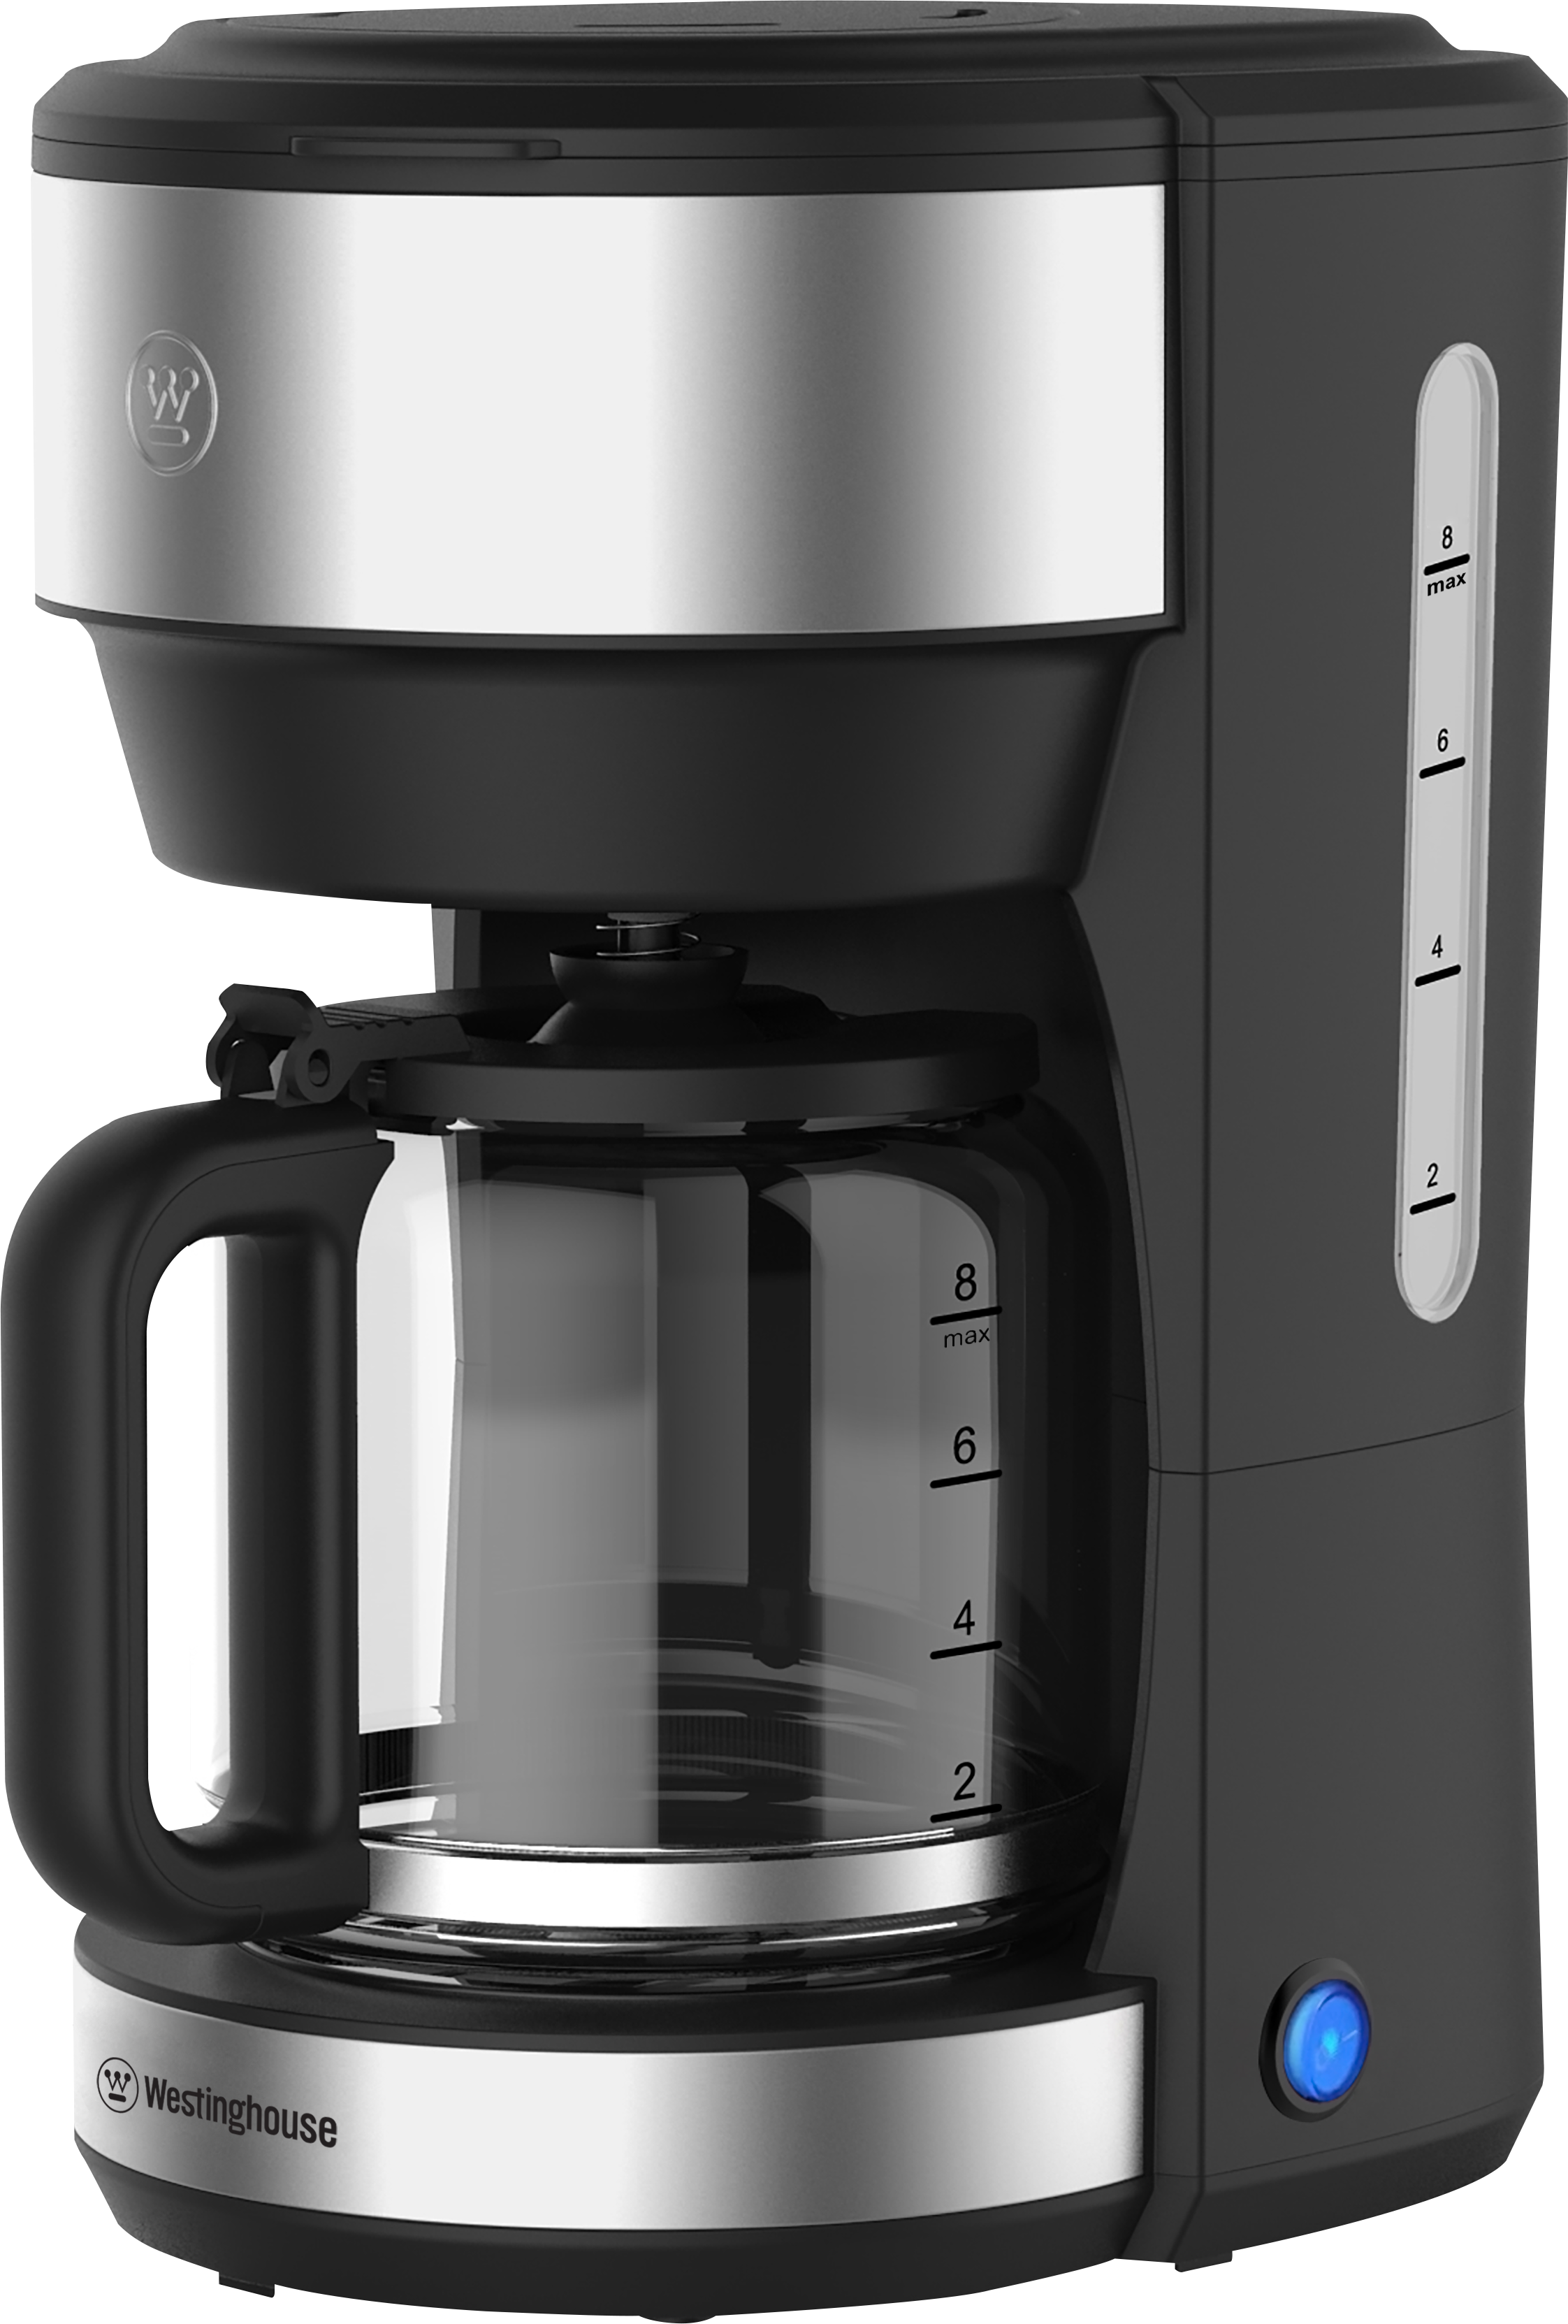 Westinghouse Basic 8-10 Cup Coffee Maker in Black